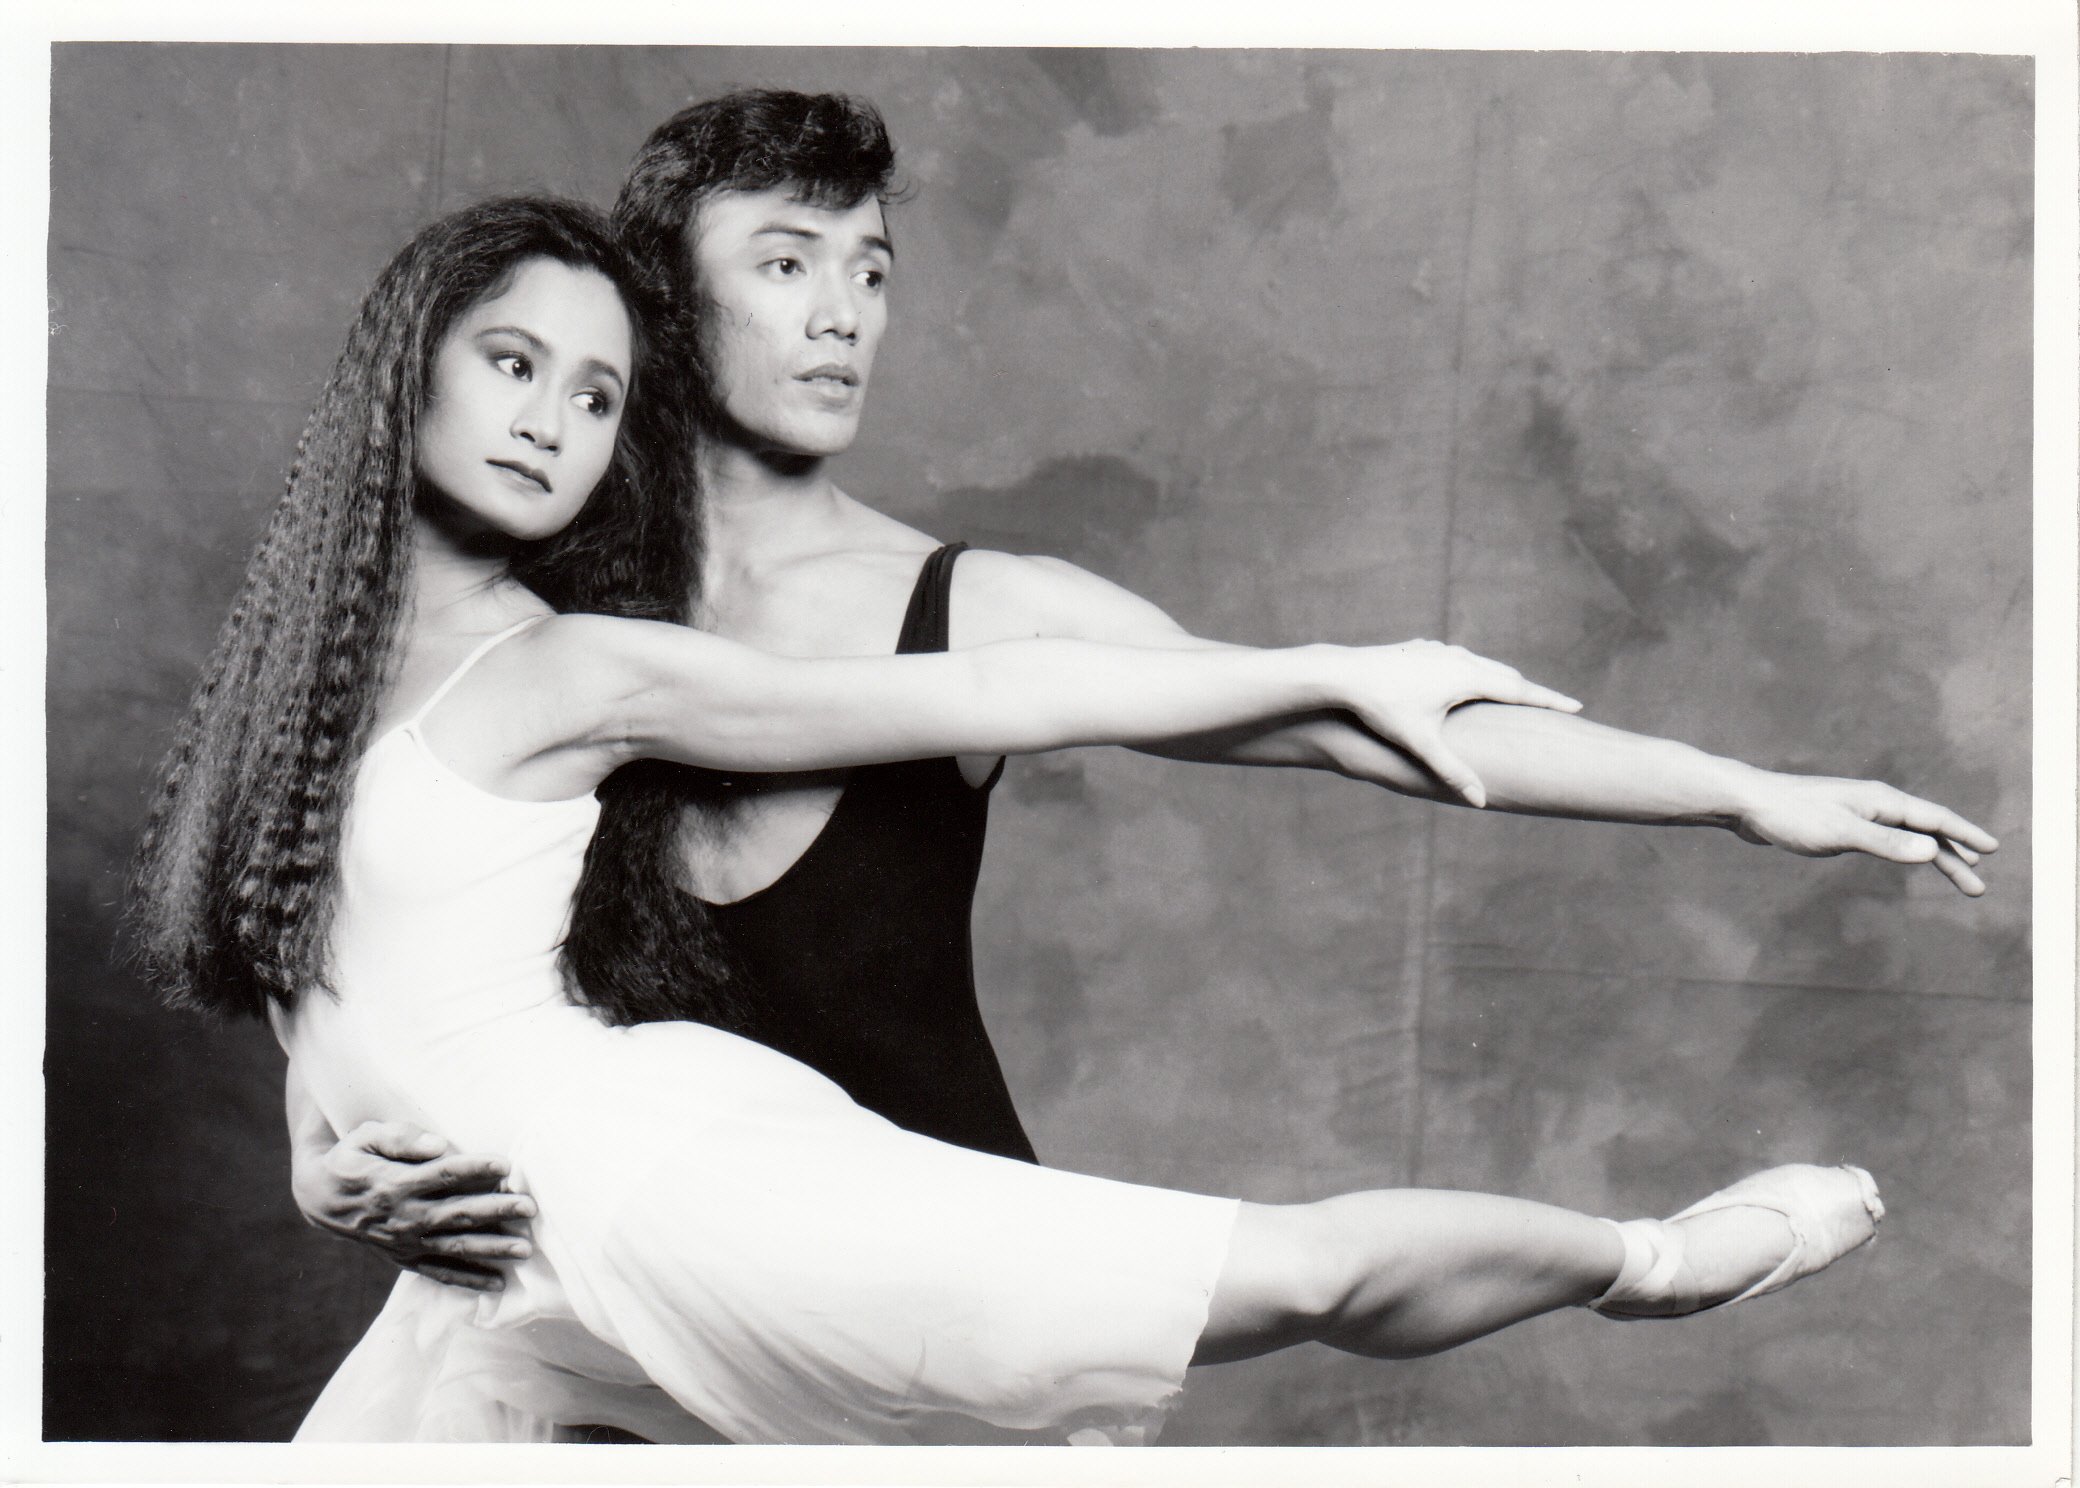    Publicity photo for Philippine Ballet Theater’s  Romeo and Juliet , with Osias Barroso, 1994. “My second Juliet was in the version of Atlanta Ballet’s Tom Pazik which was first choreographed on prima ballerina Maniya Barredo. I had grown up quite 